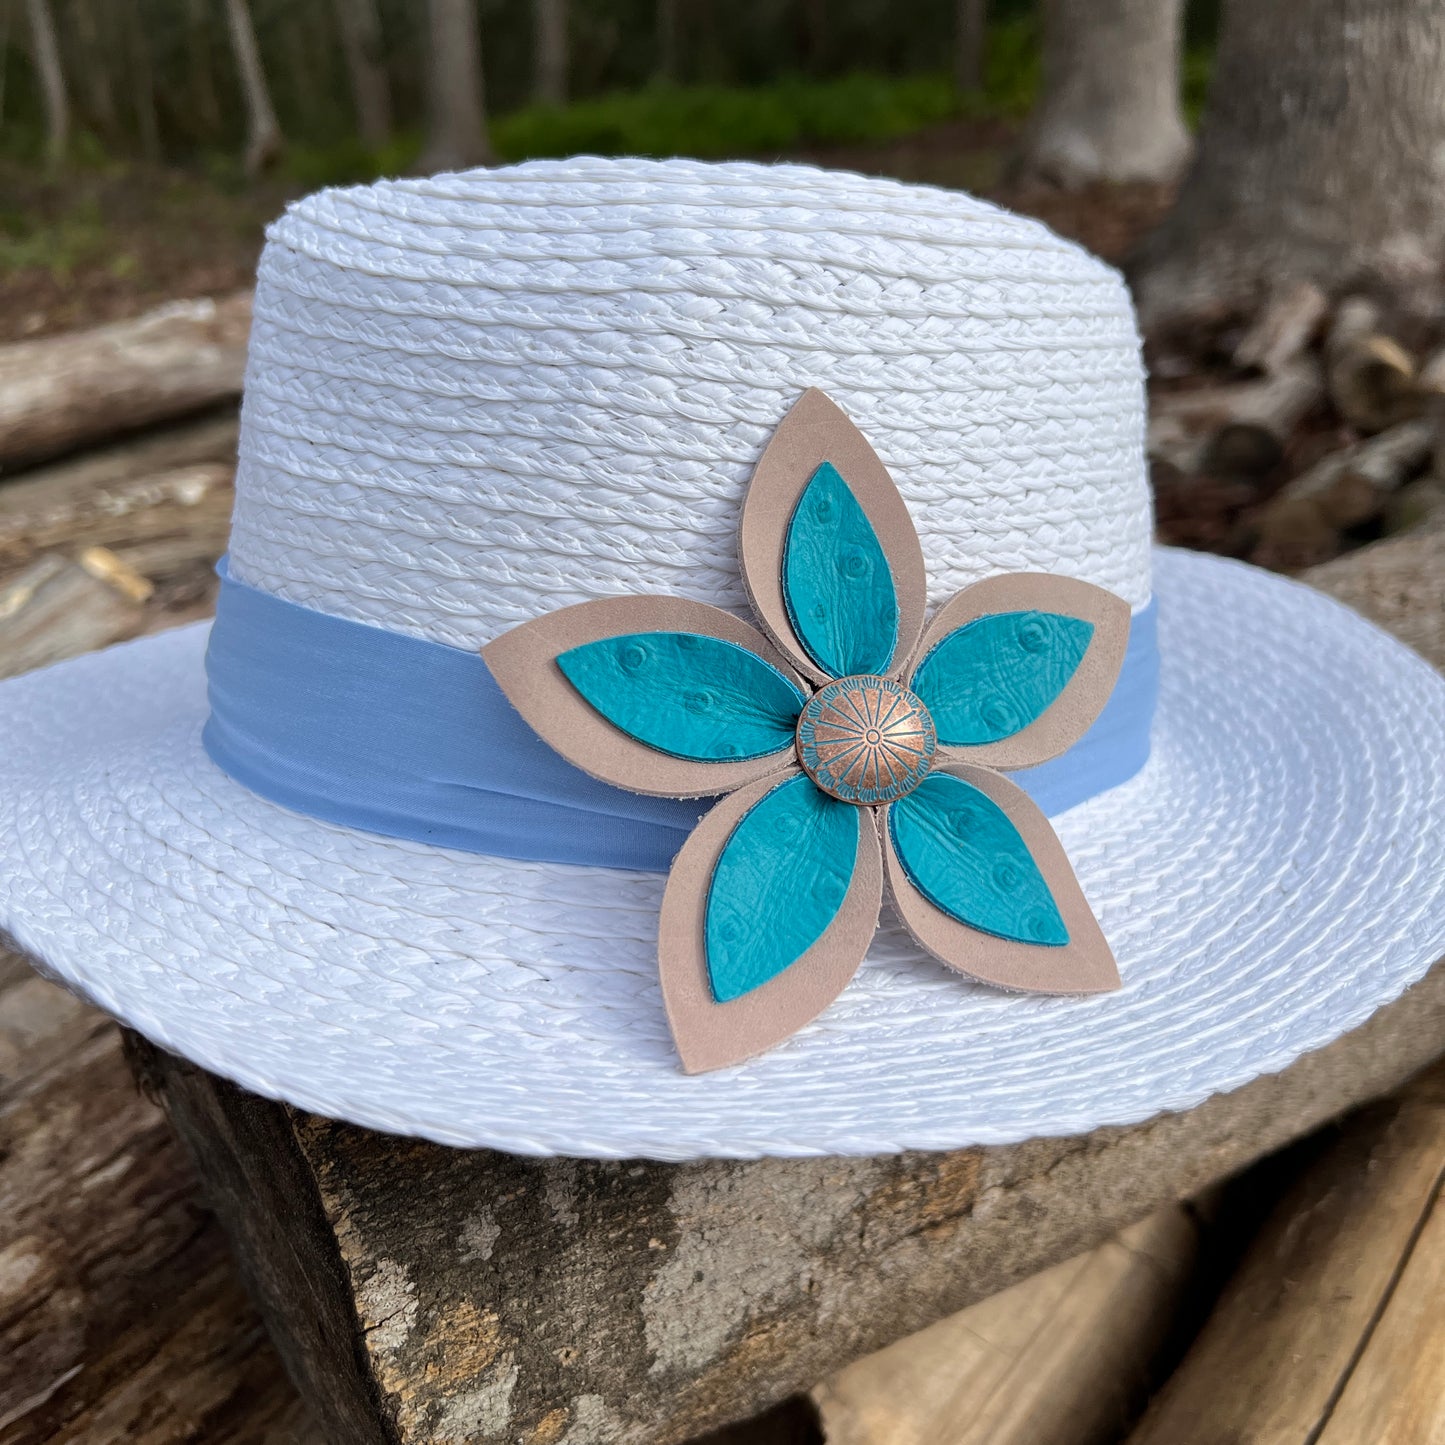 Leather Flower Brooch Pin for Hats, Lapels and Handbags - Bright Turquoise and Natural Tan